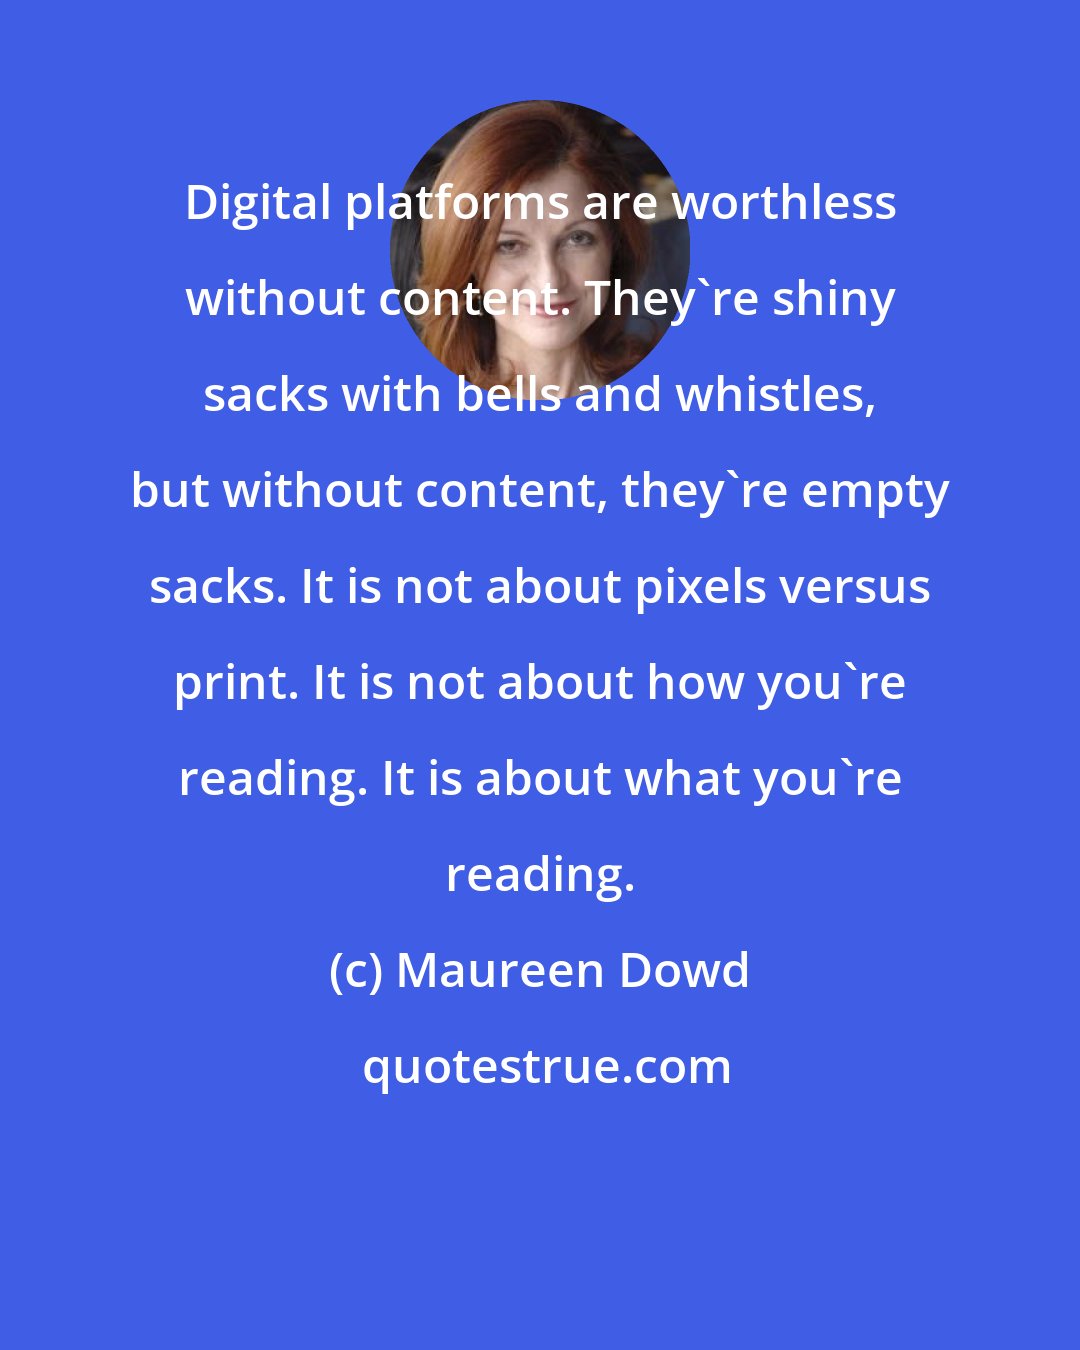 Maureen Dowd: Digital platforms are worthless without content. They're shiny sacks with bells and whistles, but without content, they're empty sacks. It is not about pixels versus print. It is not about how you're reading. It is about what you're reading.